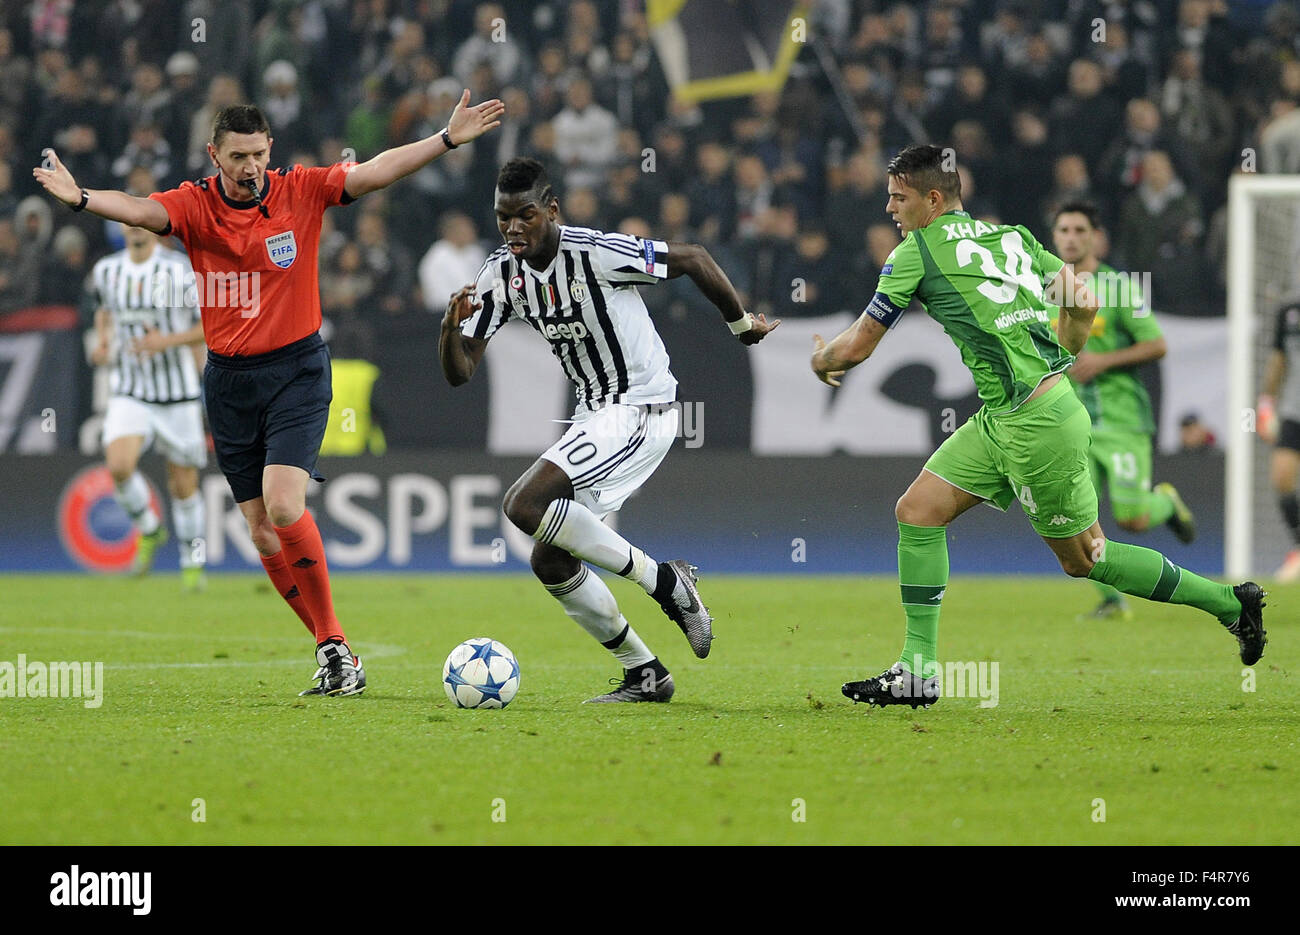 Turin, Italy. 21st Oct, 2015. Granit Xhaka (R) of Moenchengladbach and Paul Pogba of Juventus vie for the ball next to referee Craig Thomson (L) of Scotland during the UEFA Champions League Group D soccer match between Juventus F.C. and Borussia Moenchengladbach at Juventus Stadium in Turin, Italy, 21 October 2015. Photo: Stefano Gnech/dpa/Alamy Live News Stock Photo